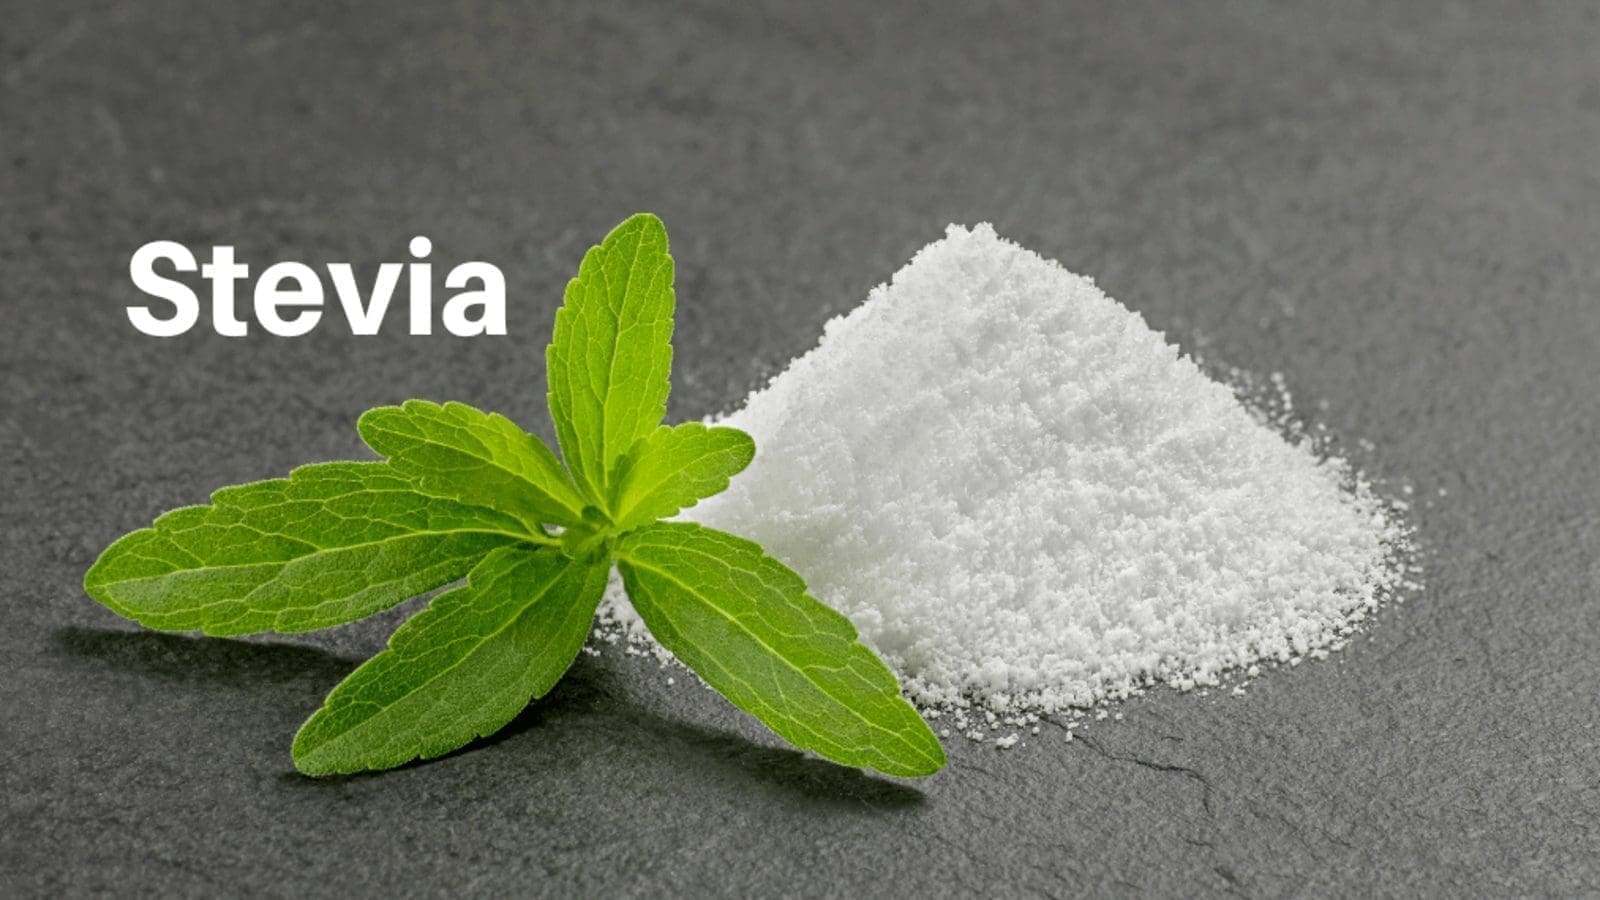 Production of steviol glycosides extracted from stevia proves to be sustainable: new study from University of Surrey suggests